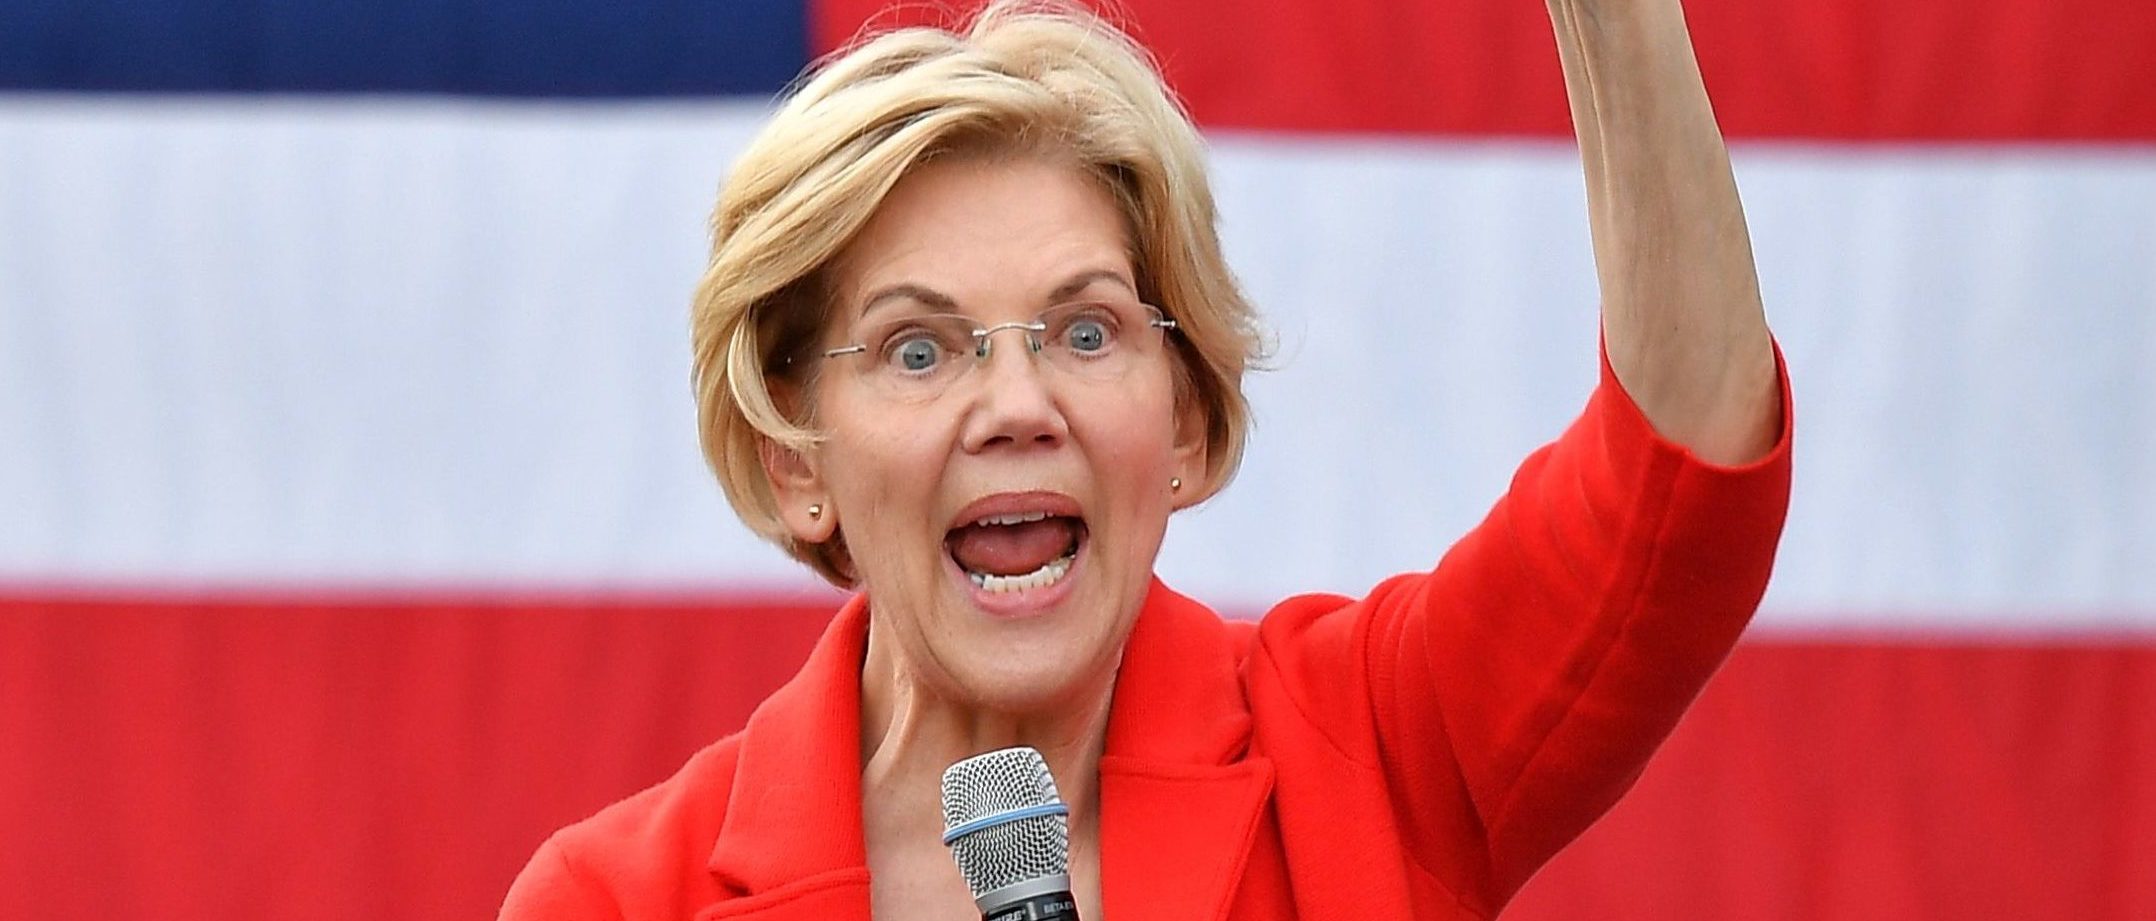 TOPSHOT - Democratic presidential candidate Elizabeth Warren gestures as she speaks during a campaign stop at George Mason University in Fairfax, Virginia on May 16, 2019. (Photo by MANDEL NGAN / AFP) (Photo credit should read MANDEL NGAN/AFP/Getty Images)